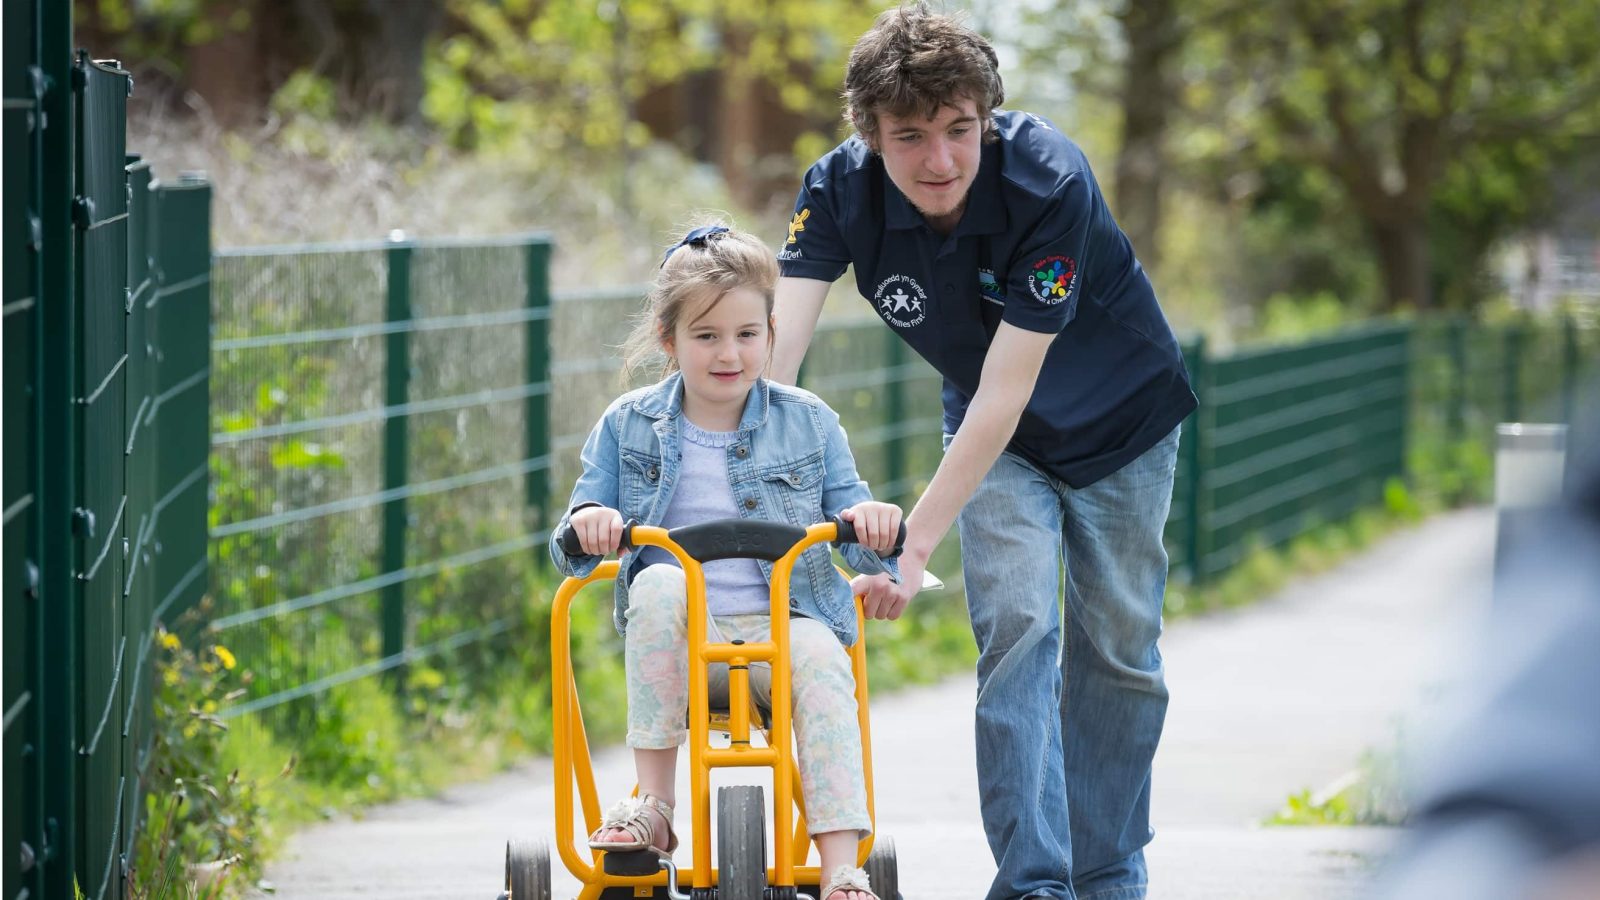 A young girl with a disability using a walker is guided by a male caregiver on a sunny path. She looks focused, the caregiver attentive and supportive, embodying the compassionate image promoted by the Design Agency